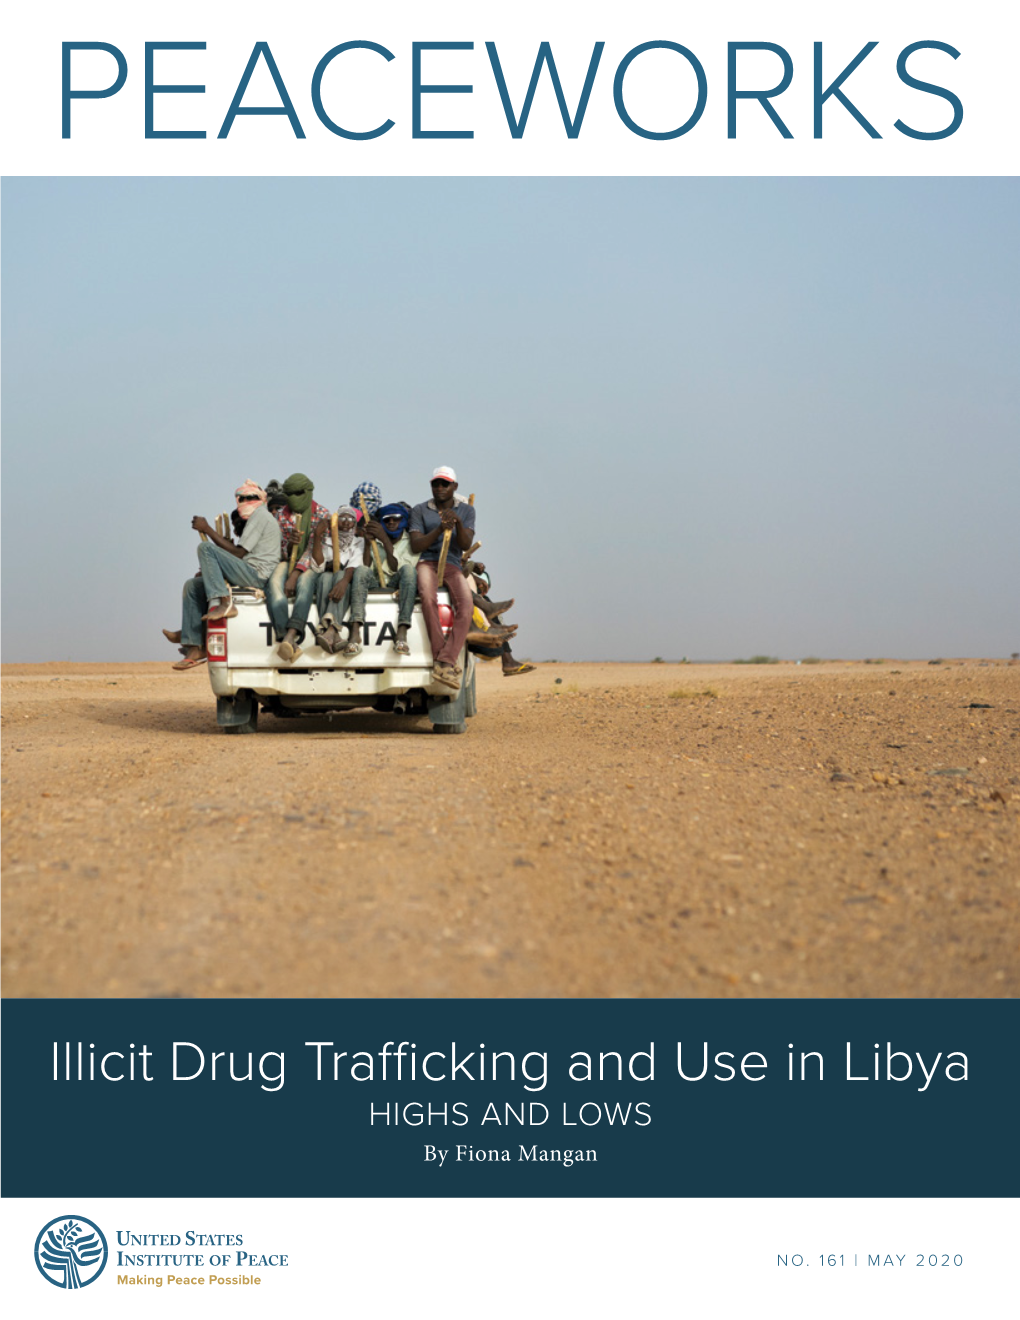 Illicit Drug Trafficking and Use in Libya HIGHS and LOWS by Fiona Mangan